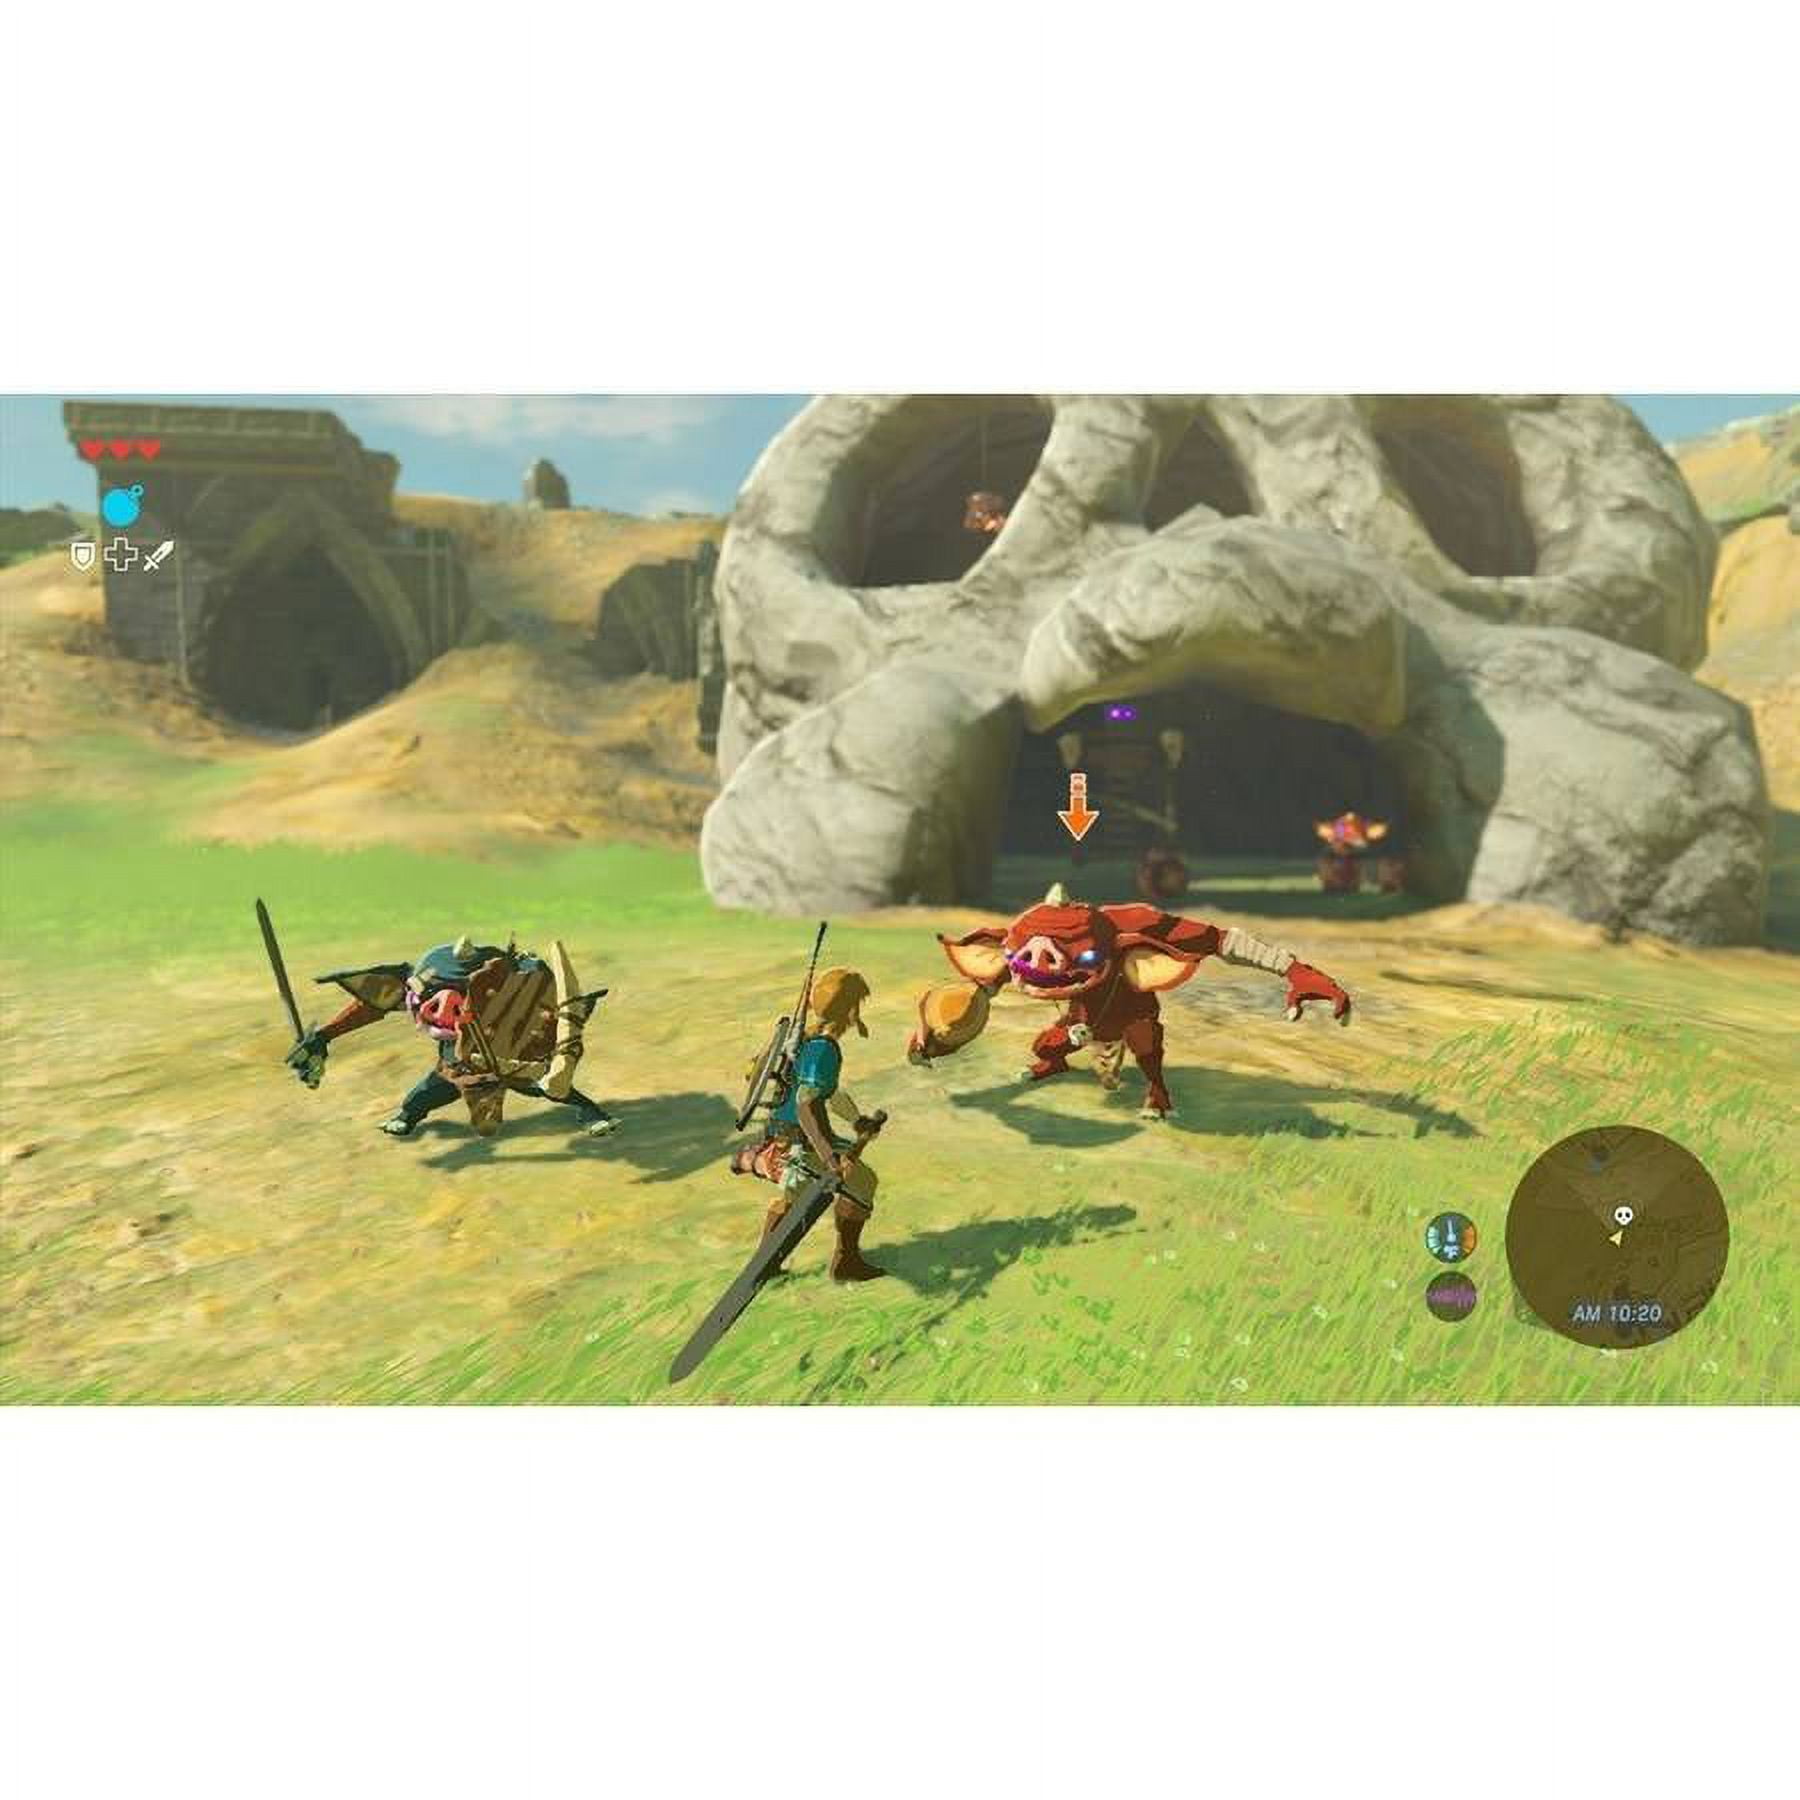 The Legend of Zelda™: Breath of the Wild for the Nintendo Switch™ home  gaming system and Wii U™ console - Features